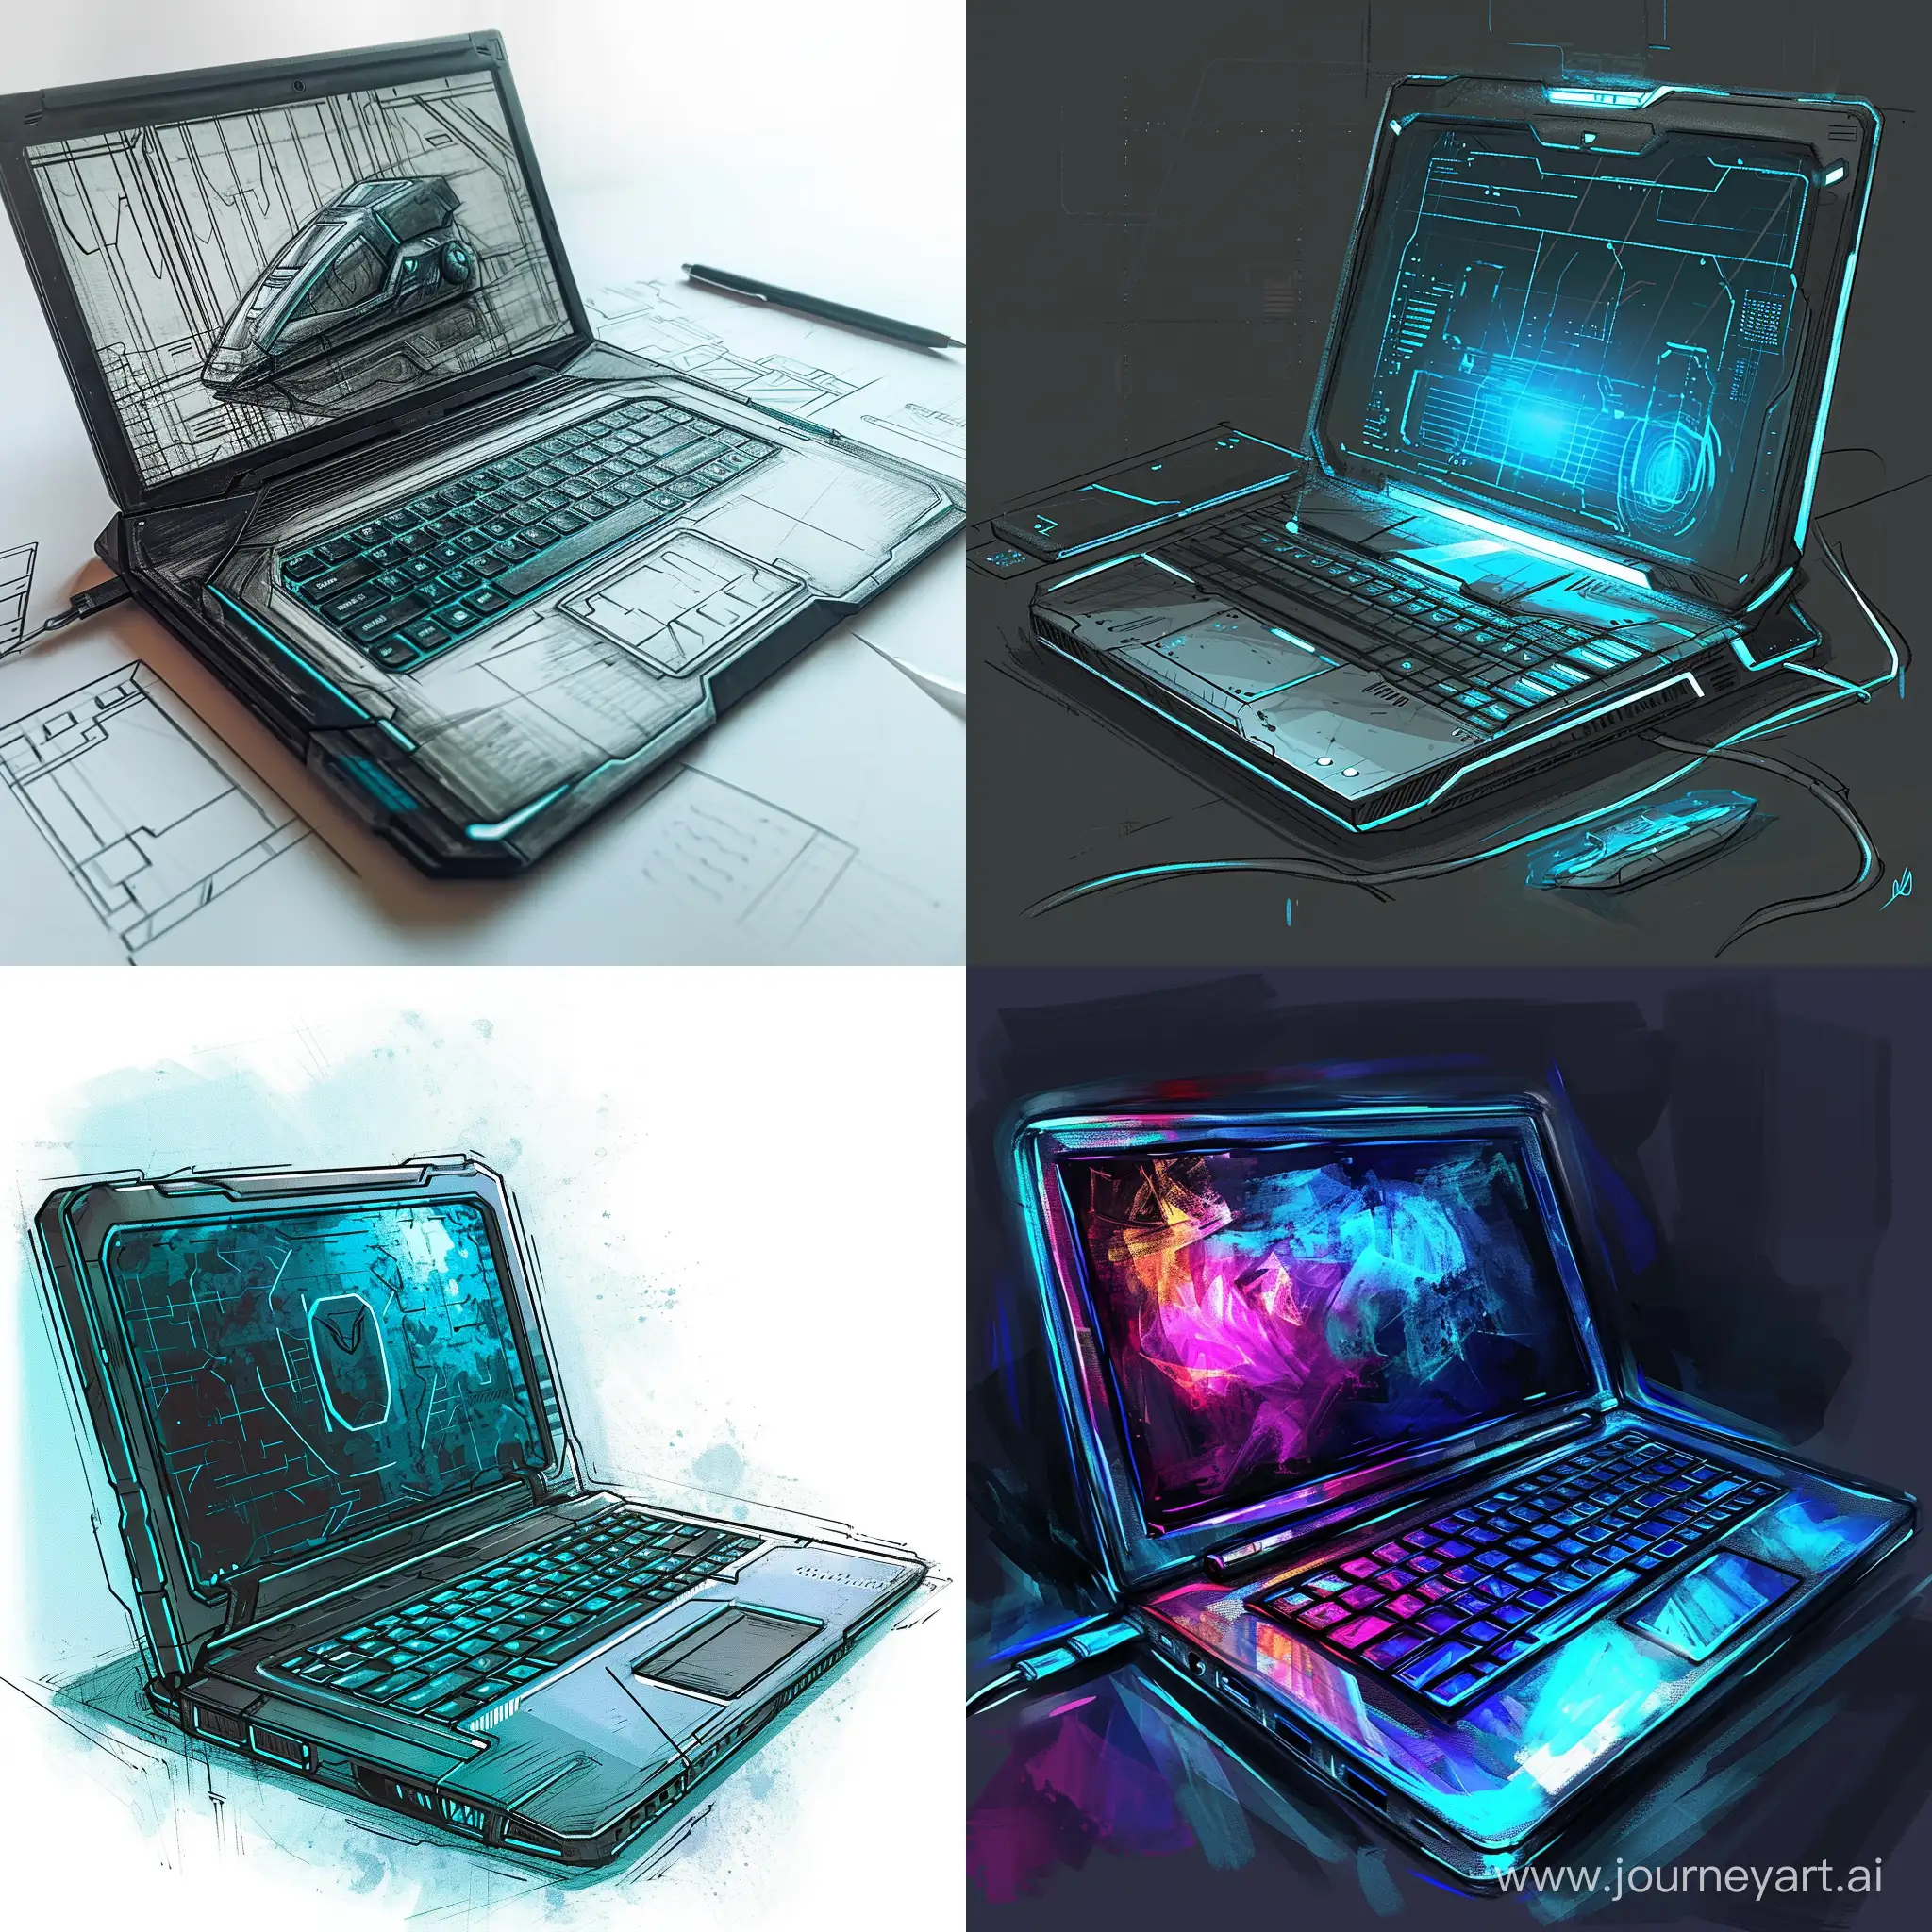 Vibrant-Futuristic-Laptop-in-Stunning-Colorful-Drawing